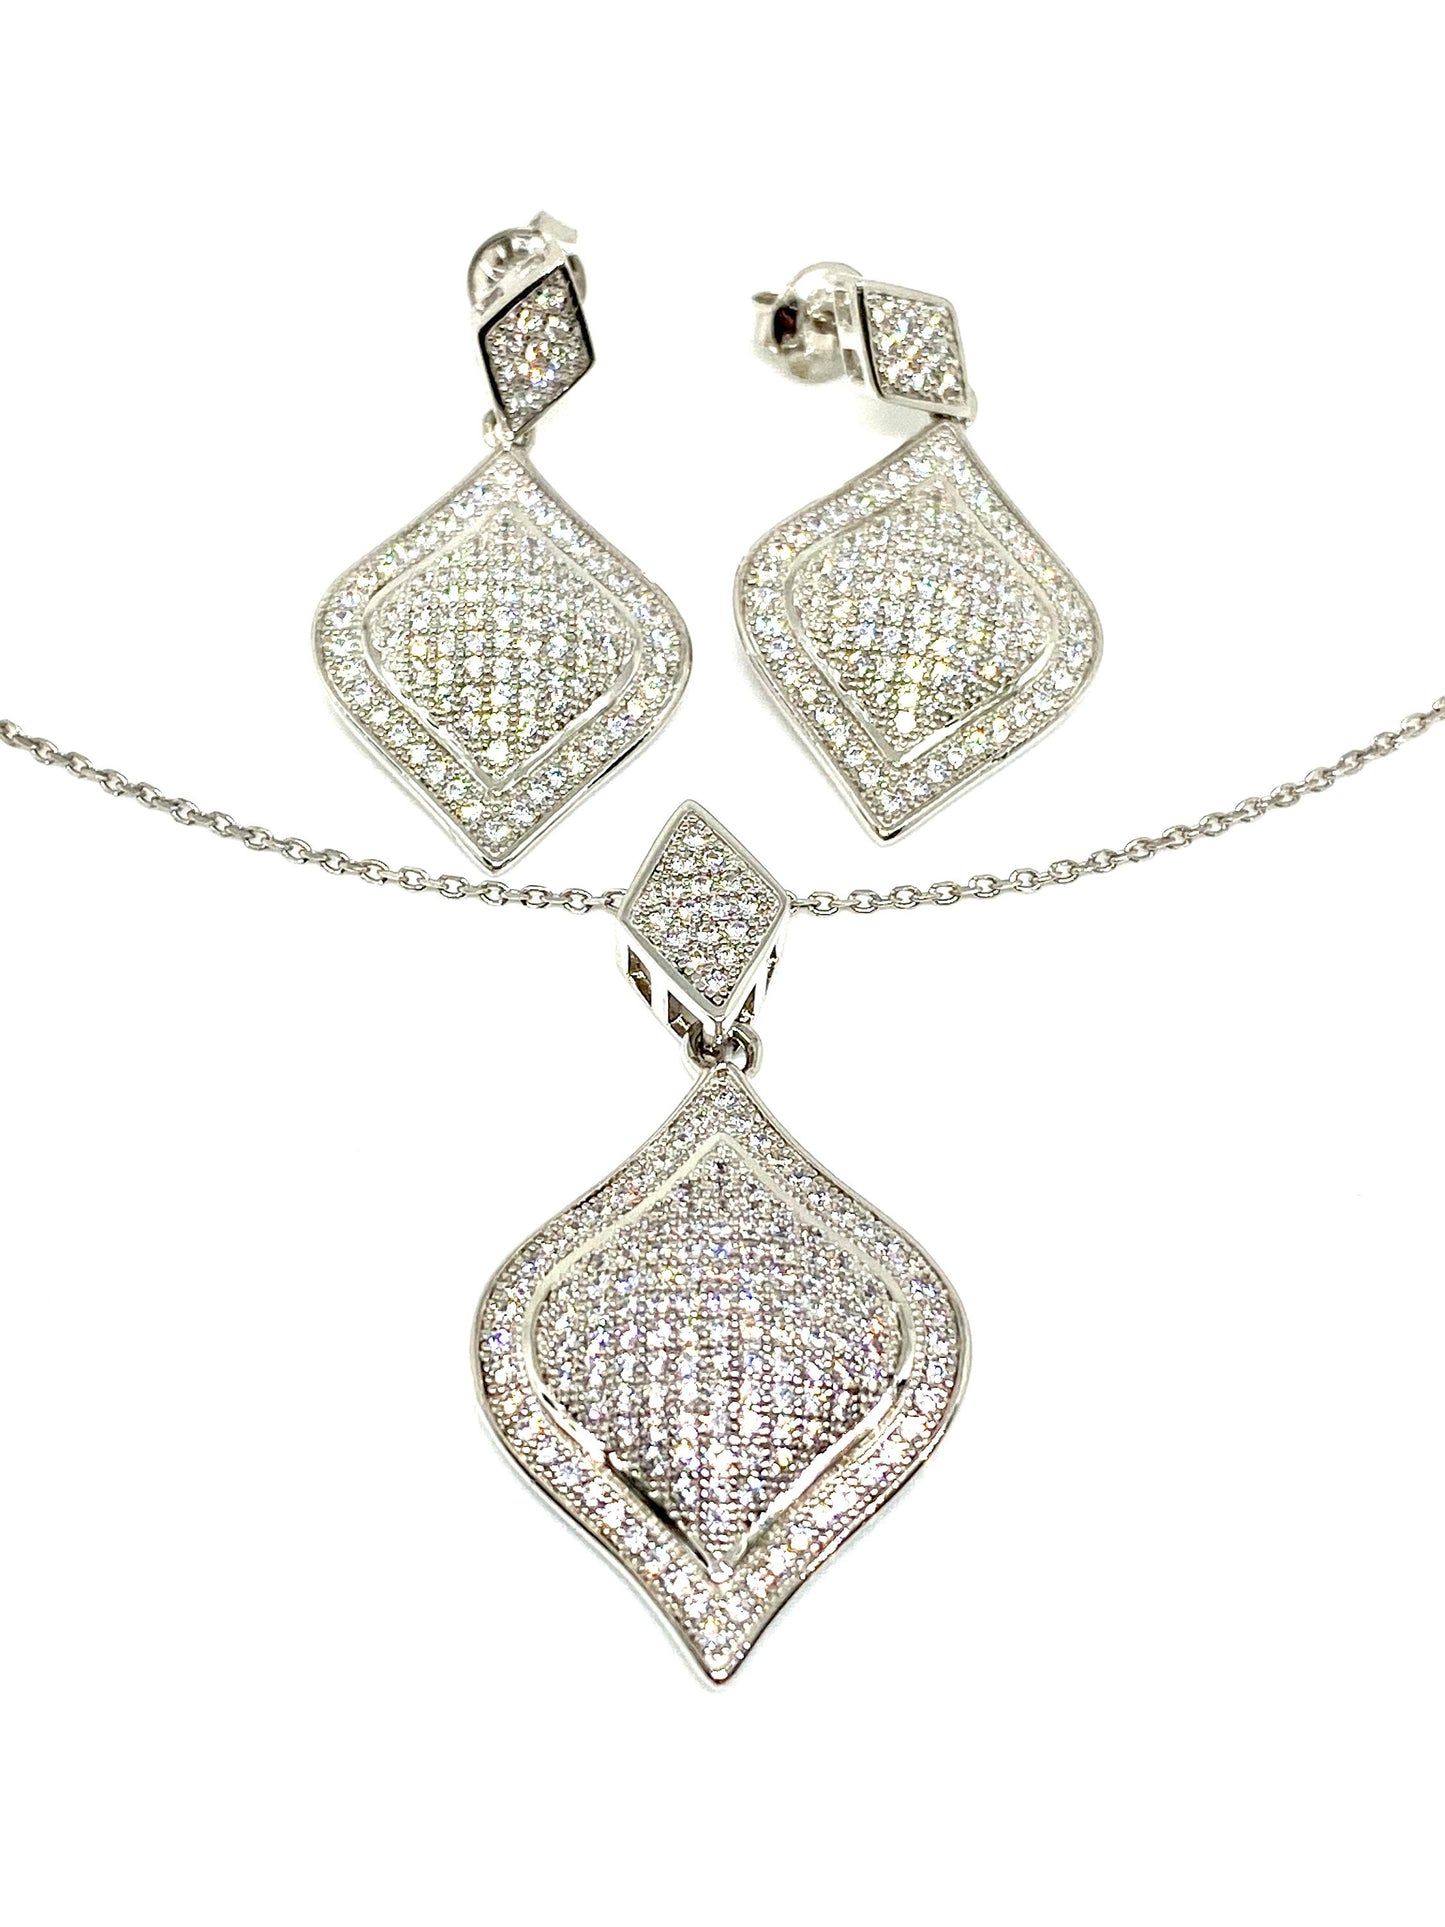 White Gold over Sterling Silver w/Round CZ Accents Dangle Pendant & Earrings Set